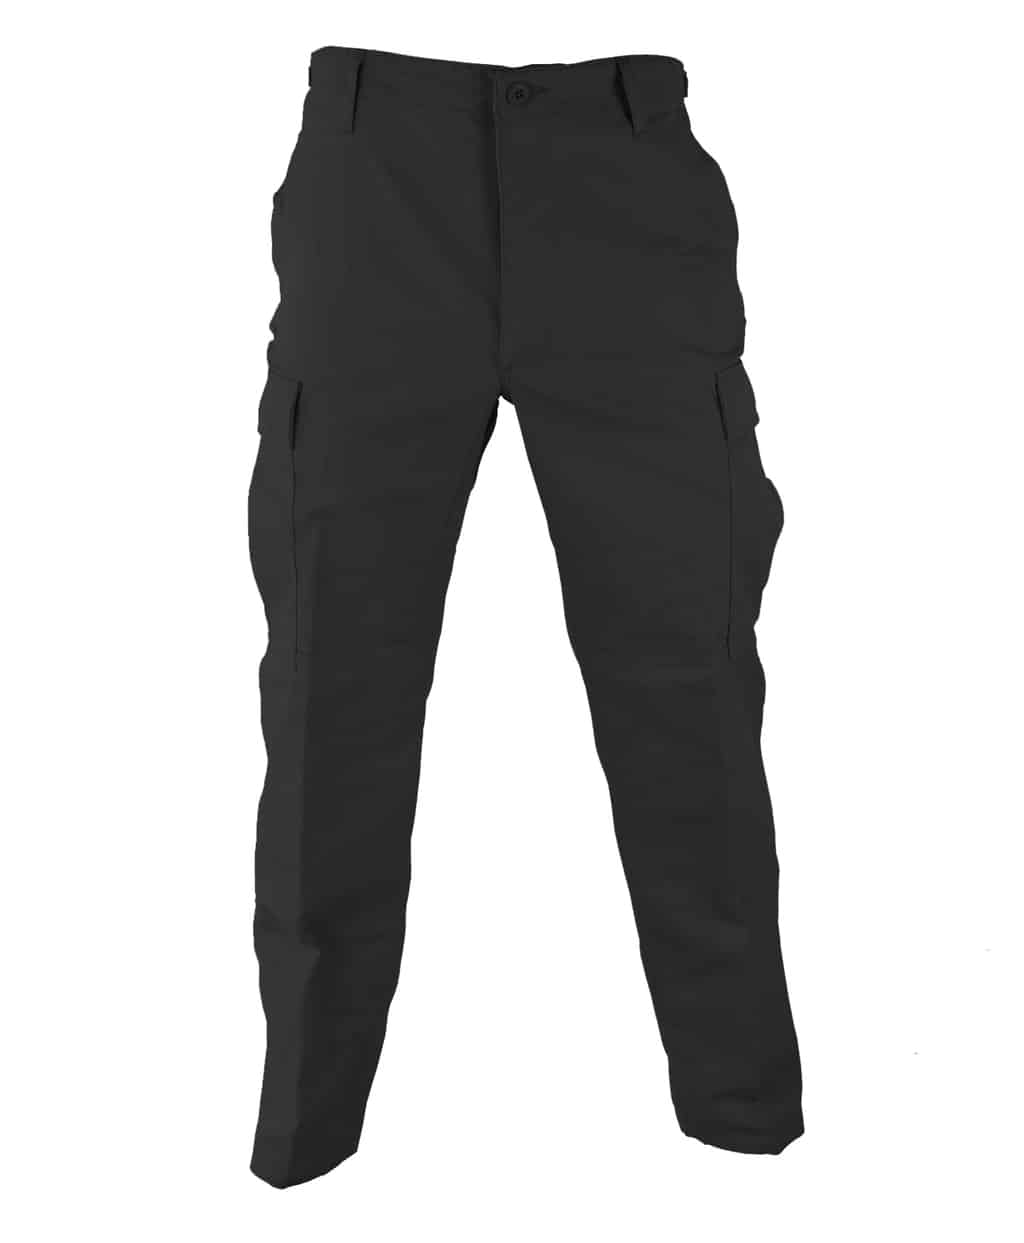 BDU Combat Trouser, Button Fly, 65%/35% Poly Cotton Blend in Black ...